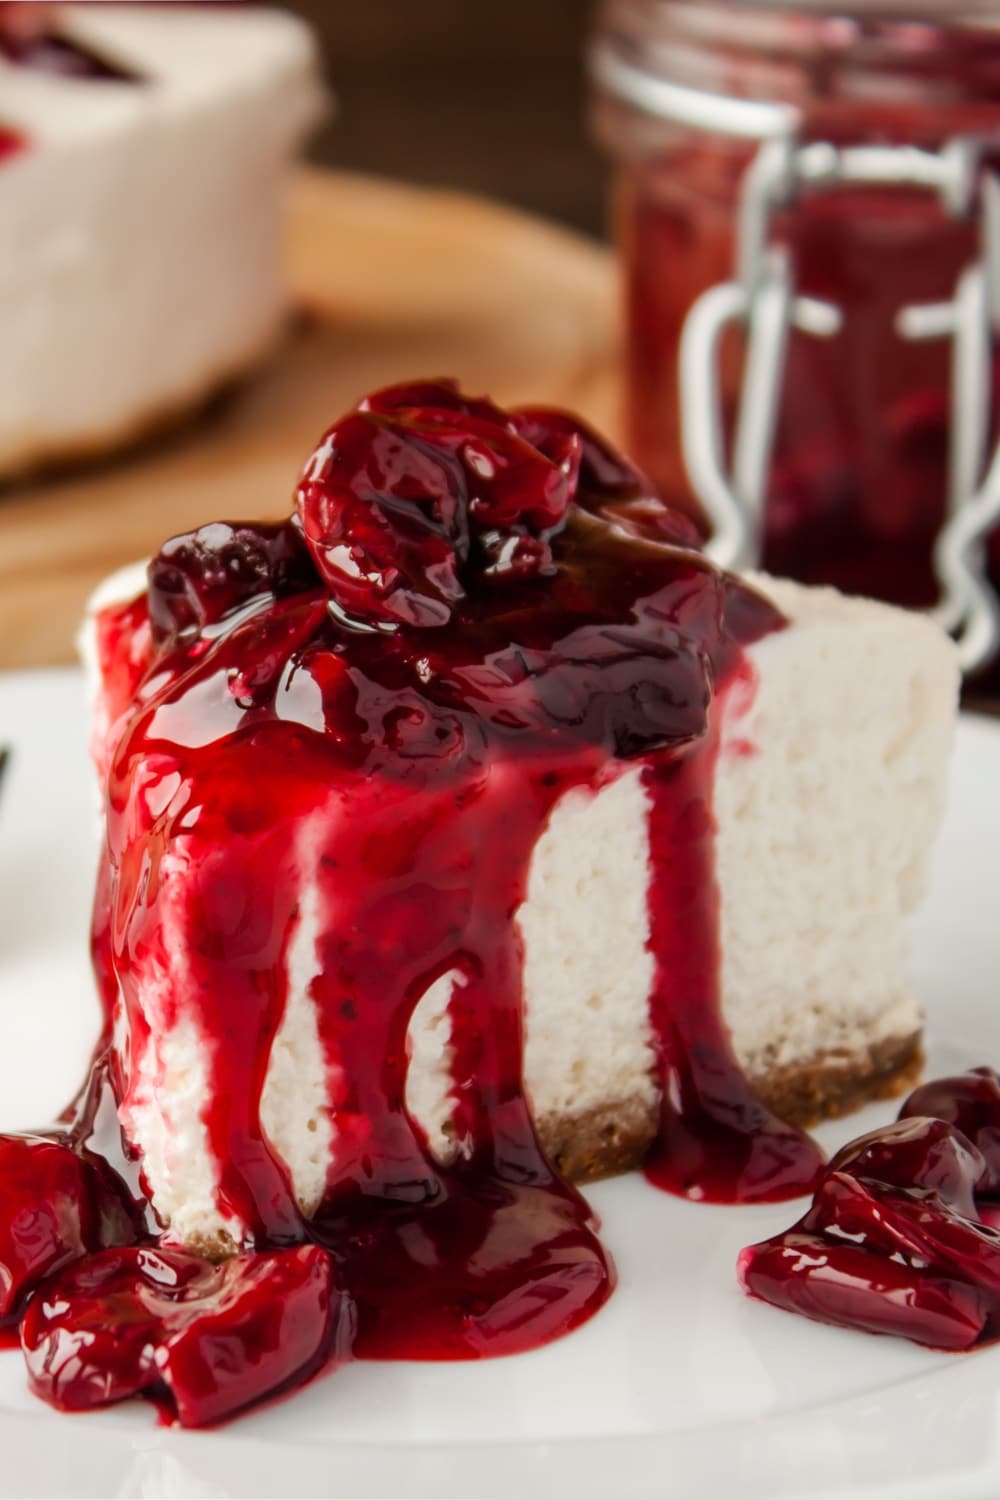 Slice of No-Bake Cherry Cheesecake Dripping With Cranberry Sauce